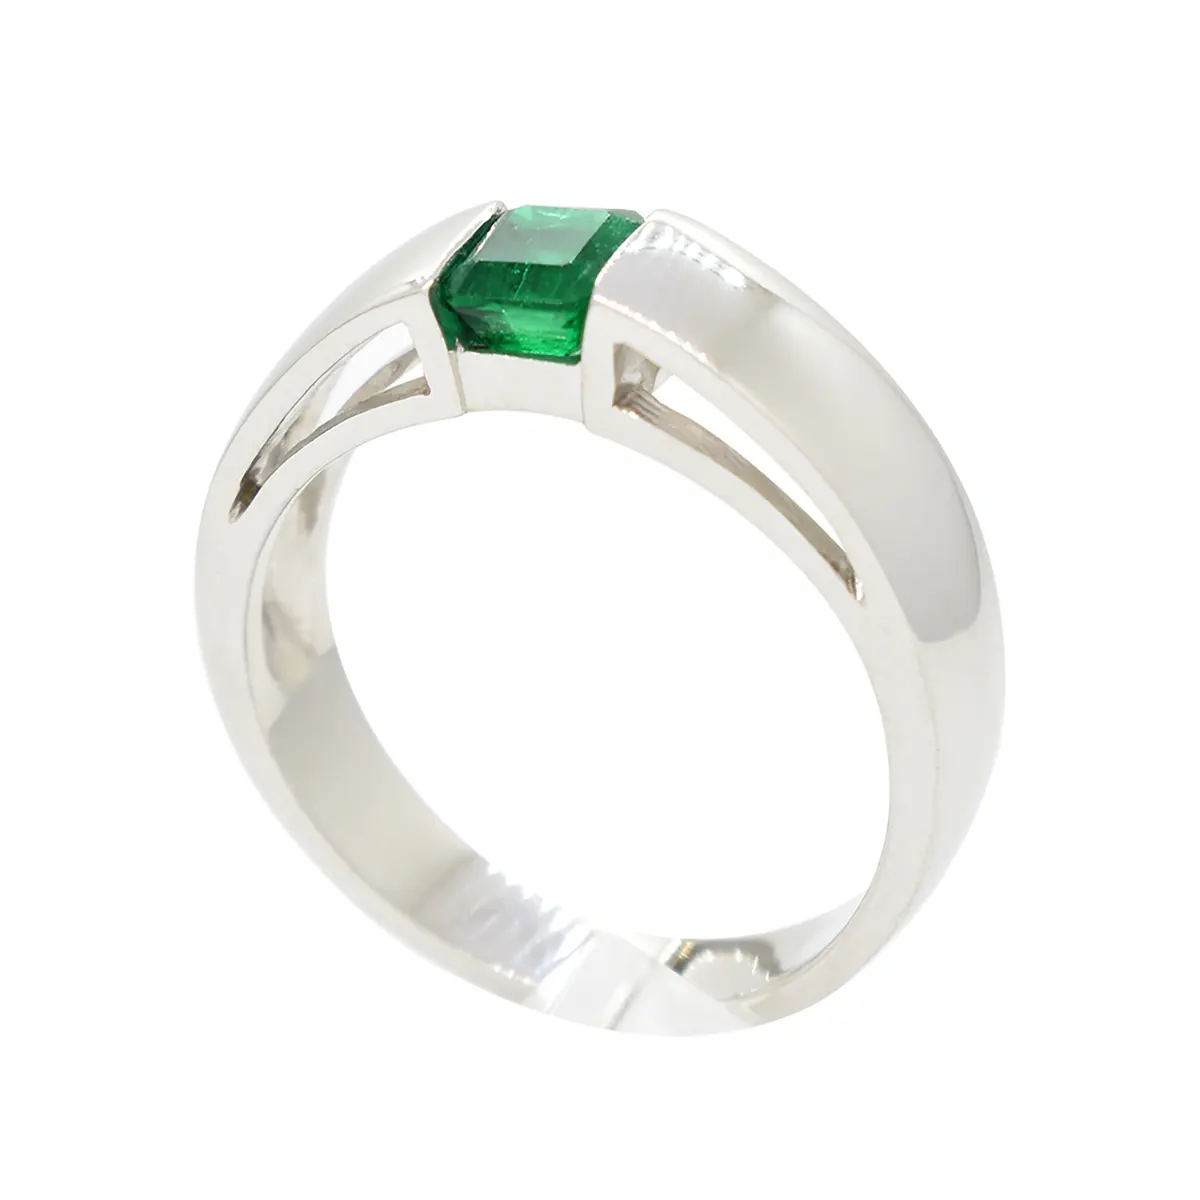 18K White Gold Ring With Emerald Cut Emerald